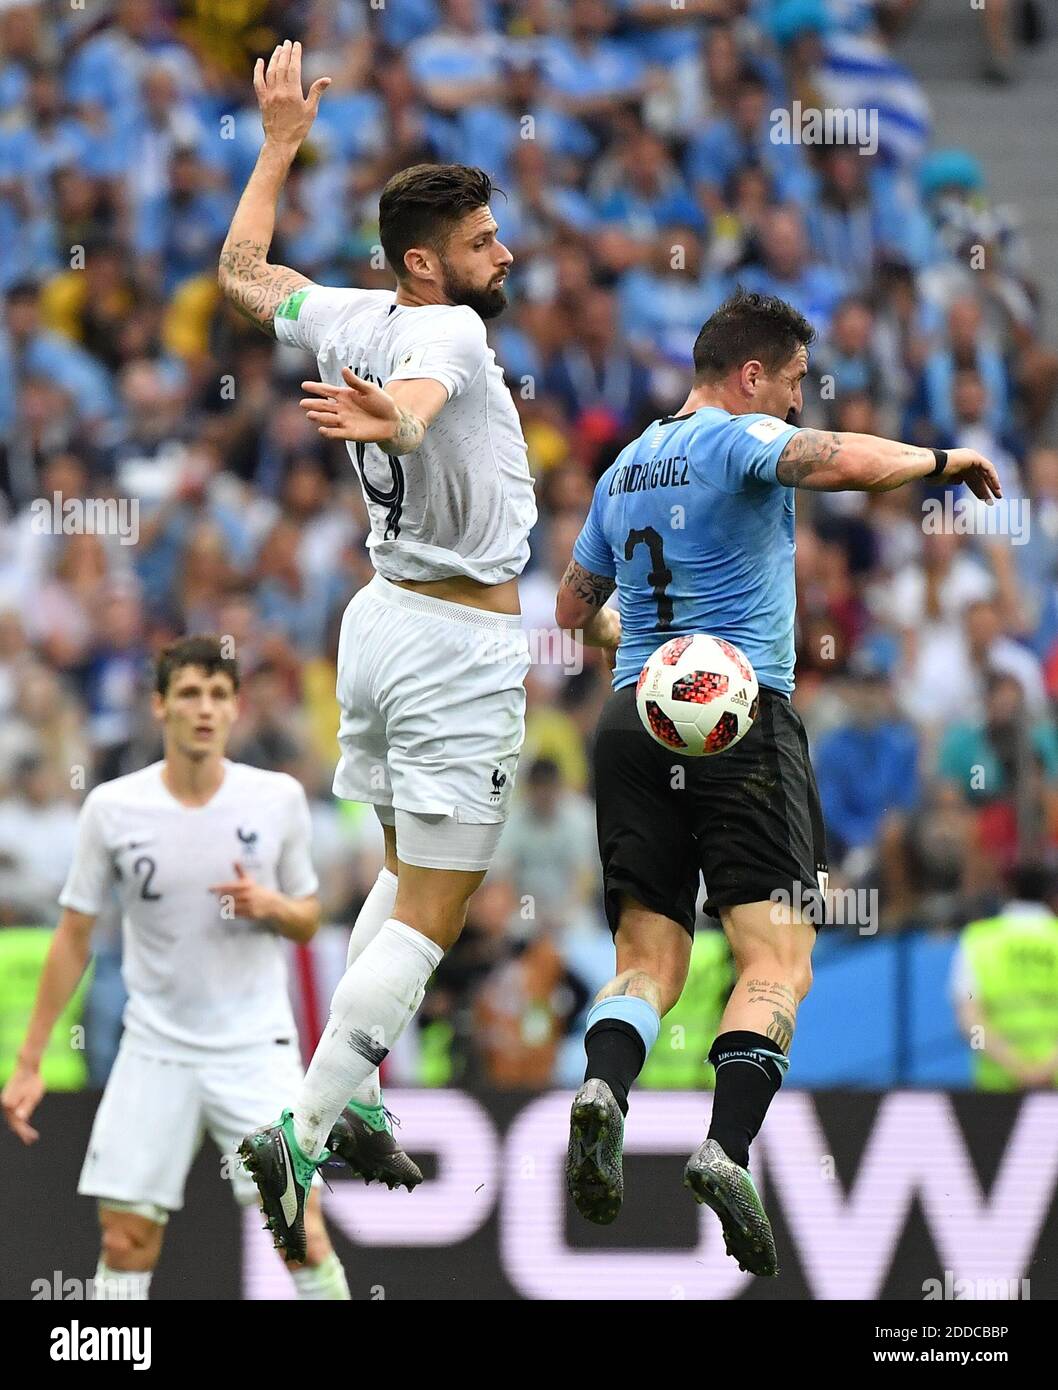 France's Olivier Giroud and Uruguay's Cristian Rodriguez during the FIFA World Cup 2018 Round of 8 France v Uruguay match at the Nizhny Novgorod Stadium Russia, on July 6, 2018. France won 2-0. Photo by Christian Liewig/ABACAPRESS.COM Stock Photo